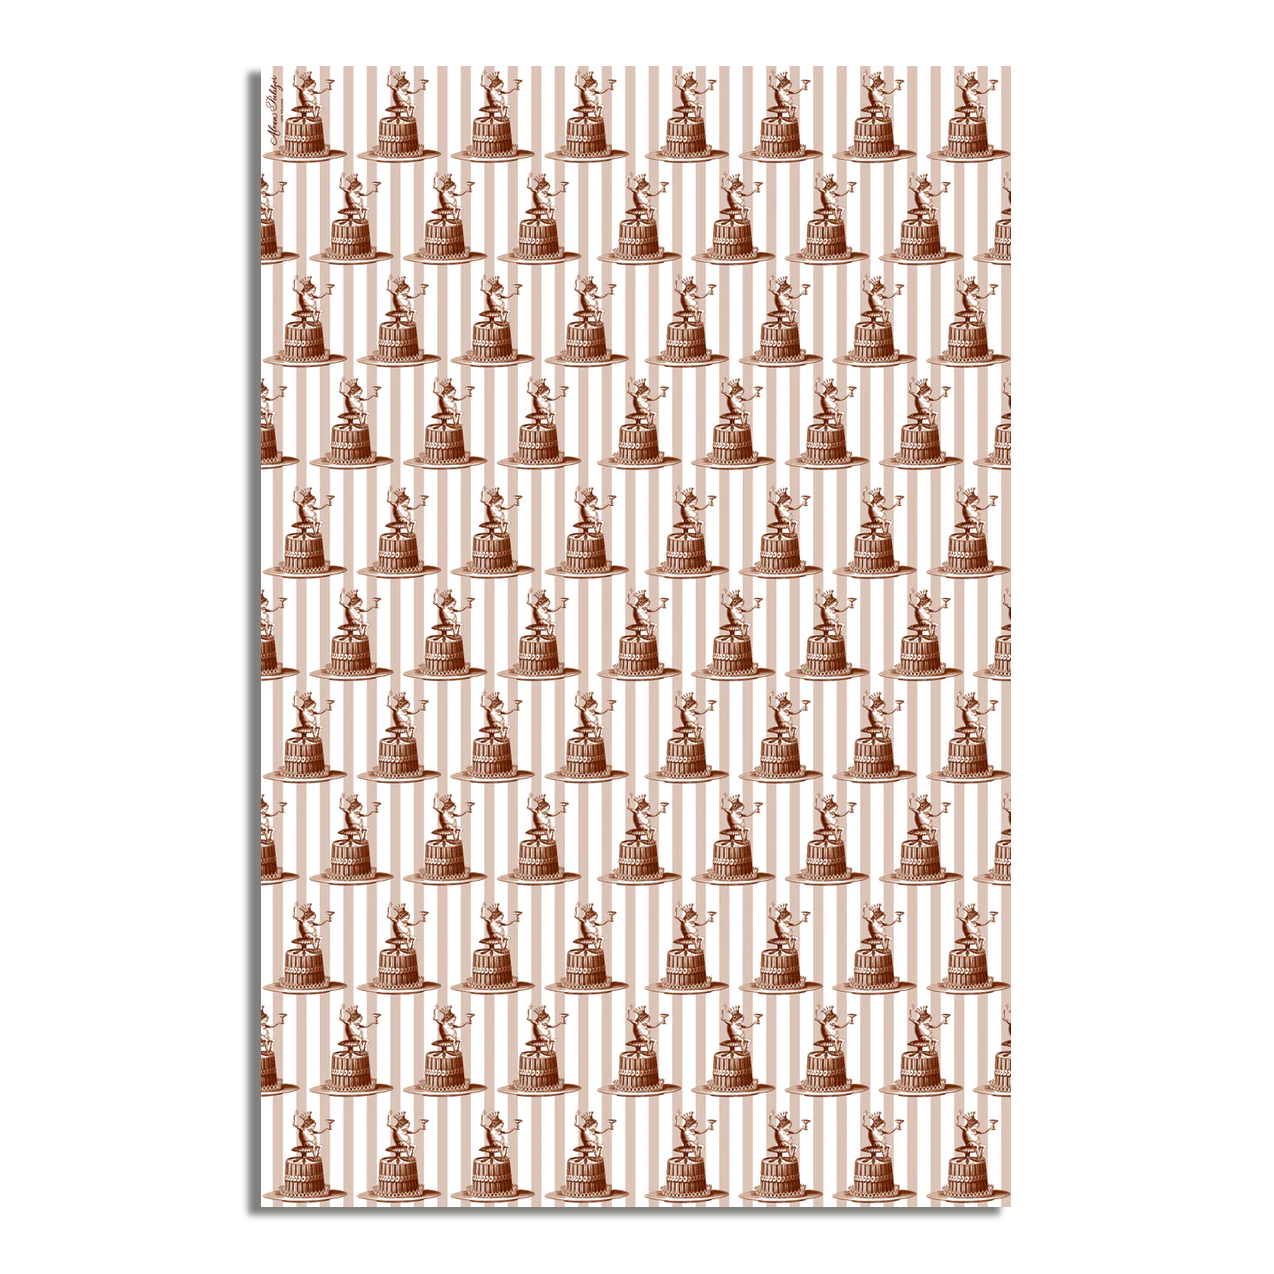 Circles and Squares Wrapping Paper - Orange